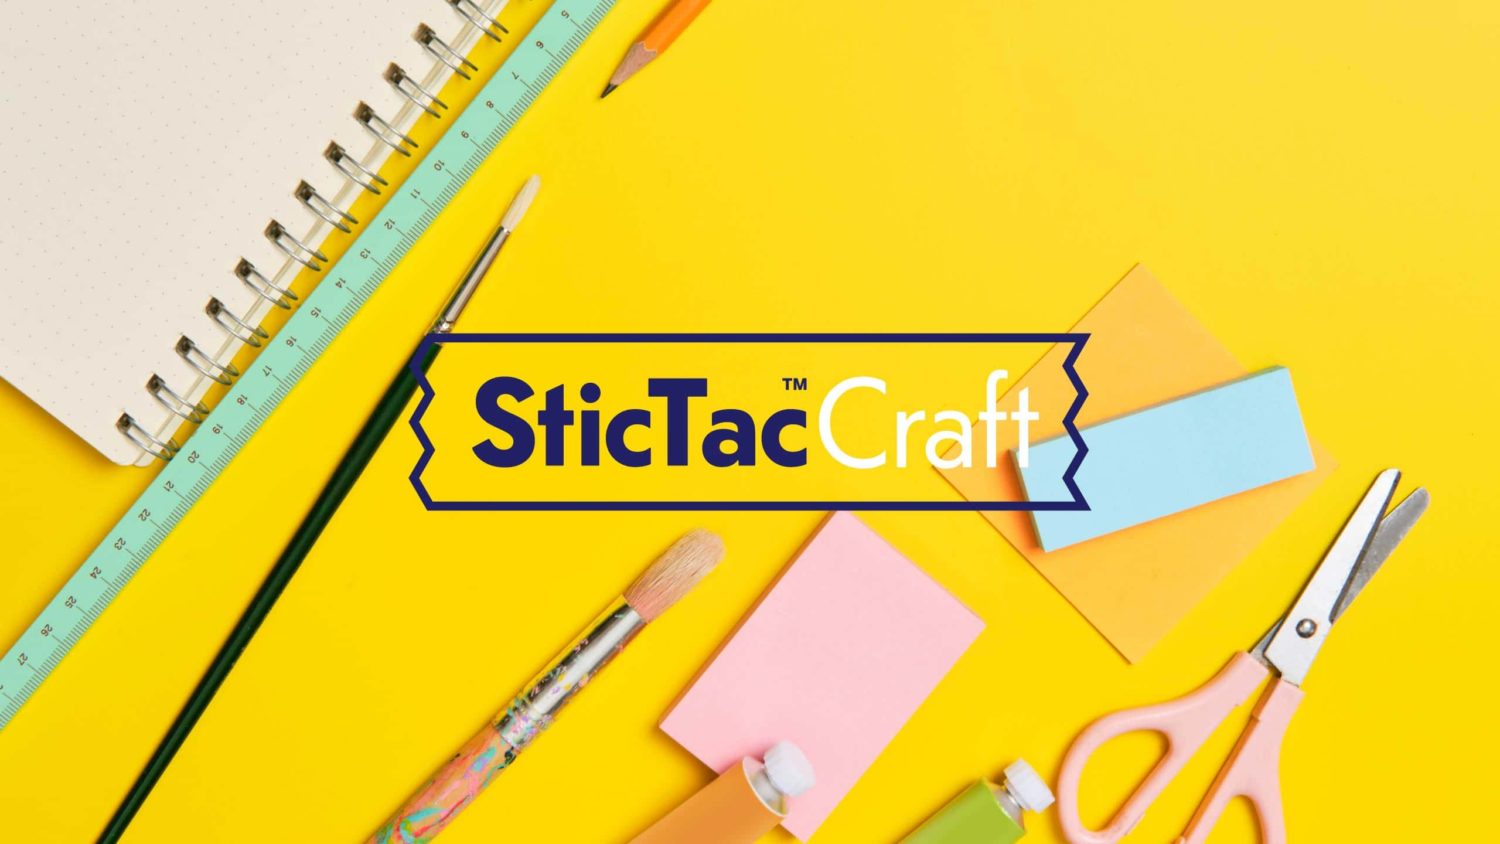 The SticTac Craft logo on a flatlay of craft supplies